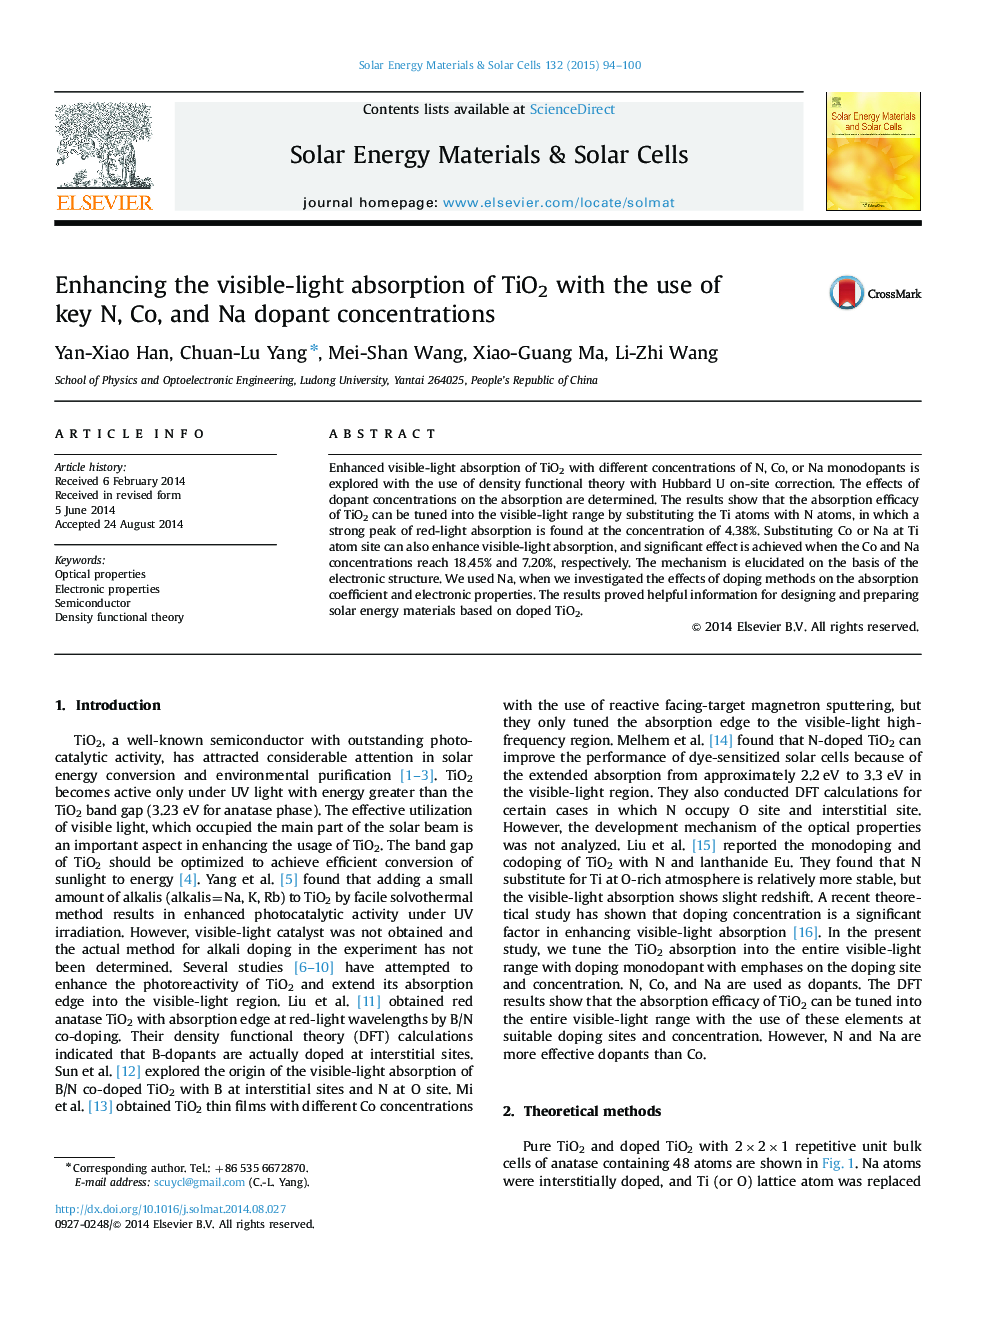 Enhancing the visible-light absorption of TiO2 with the use of key N, Co, and Na dopant concentrations